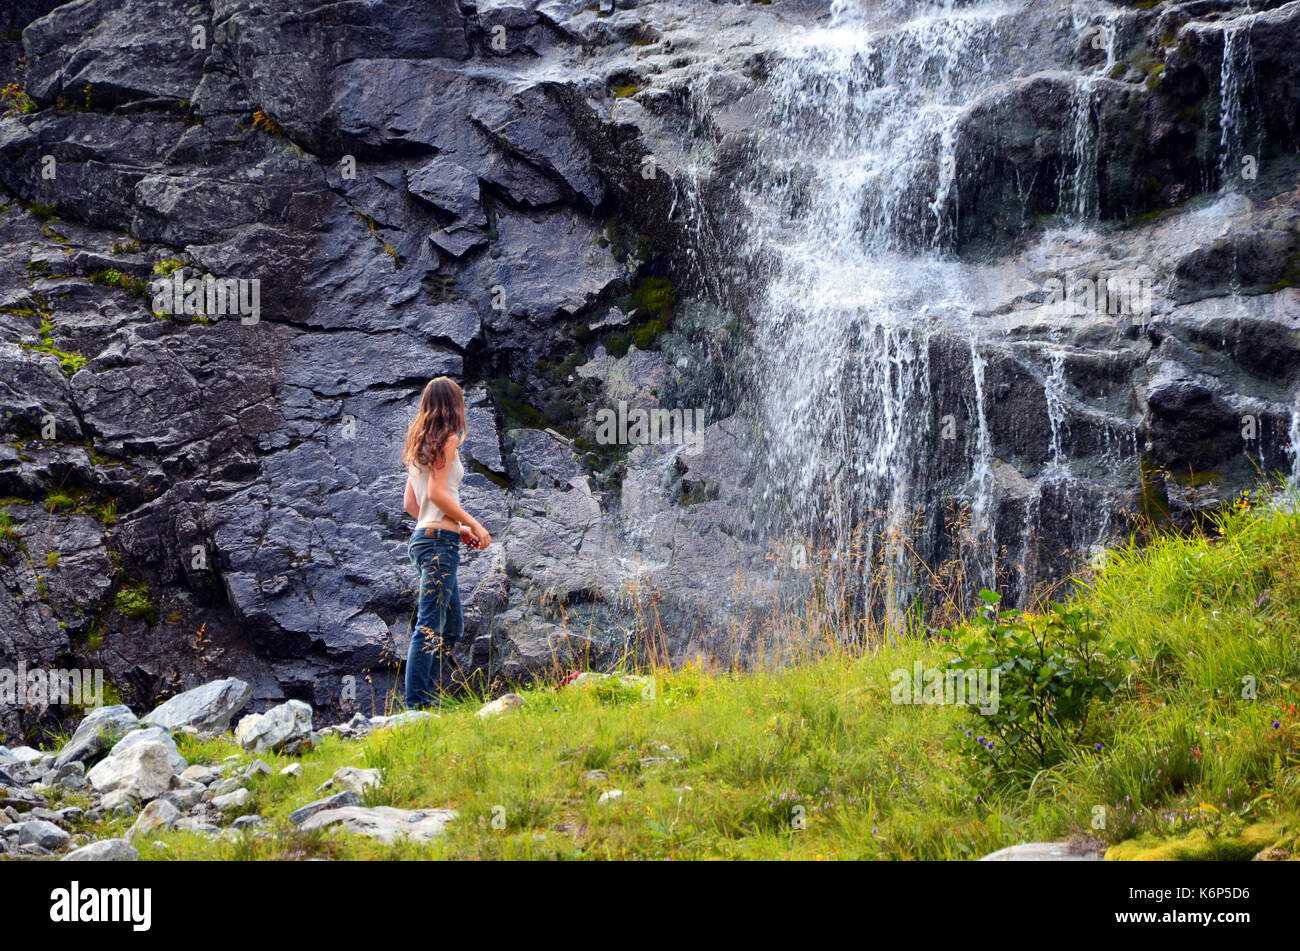 Hjorundfjord, Norway - October 2nd, 2017: Girl hiking to a Waterfall in Sunmore Alps, near Hjorundfjord, Norway Stock Photo